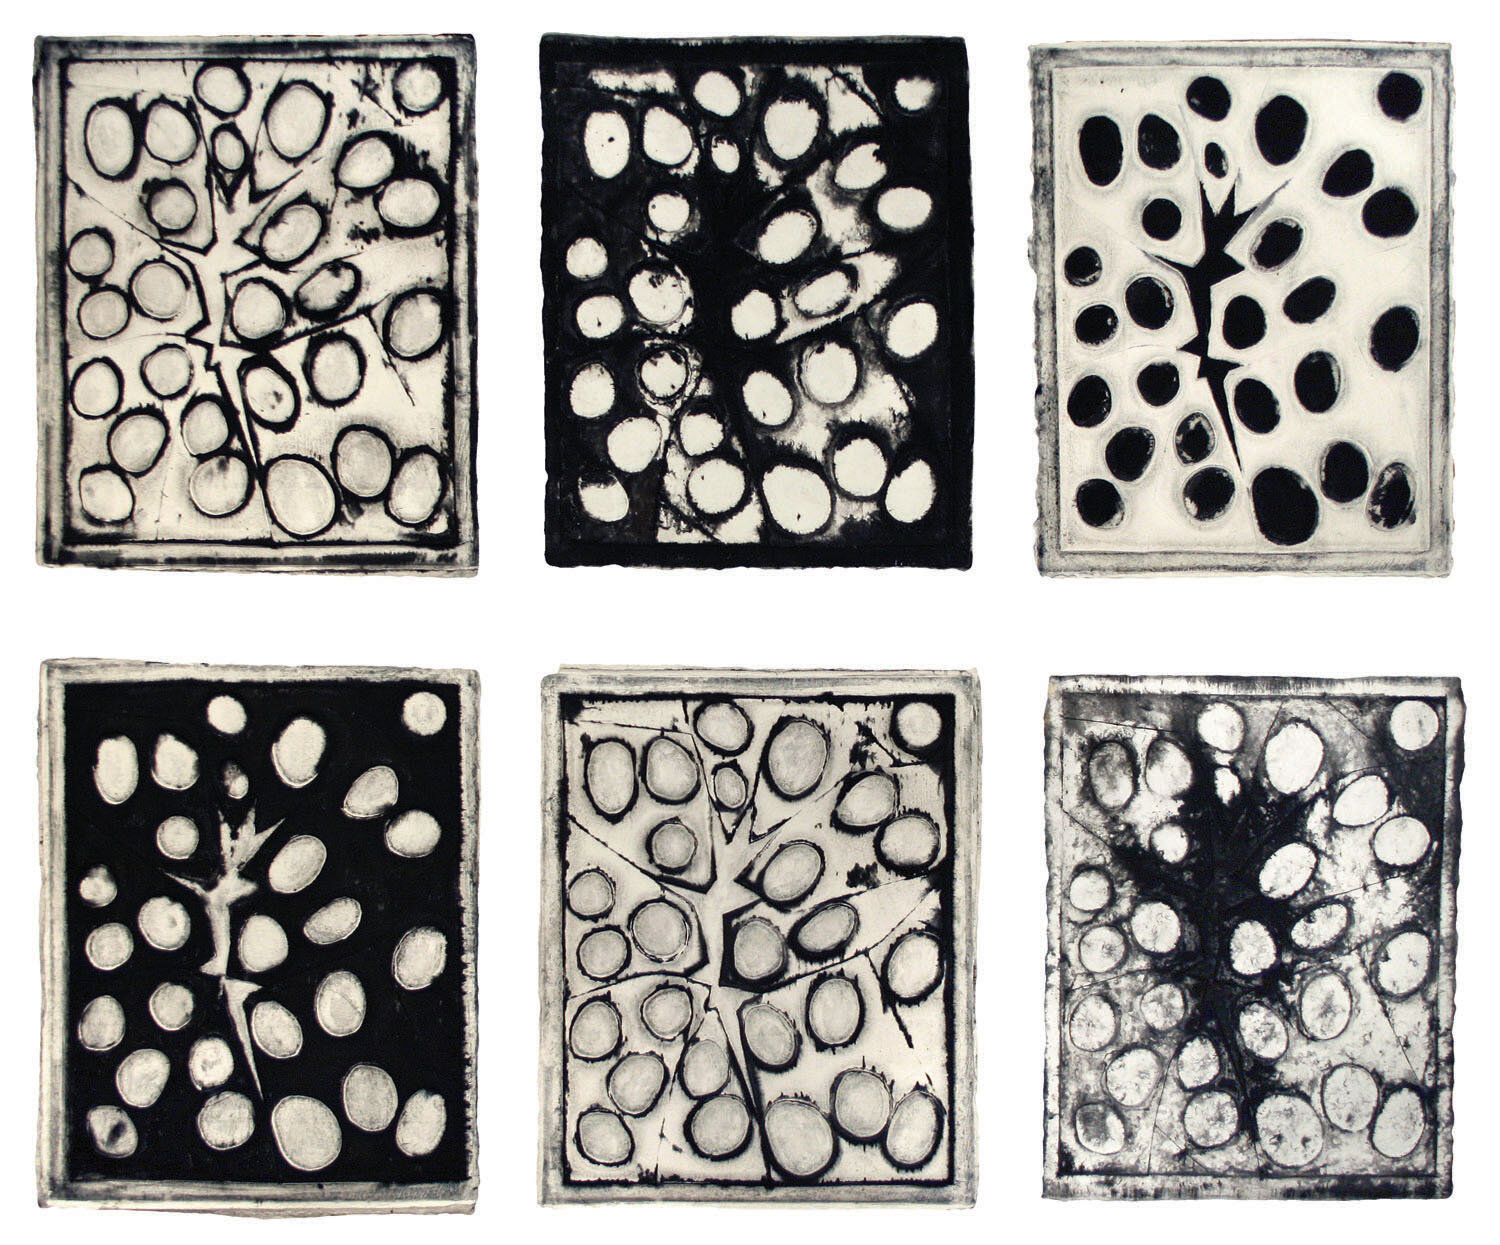  Mel Kendrick,  Untitled,  2008, Cast paper with pigment, 29 x 23 inches each 